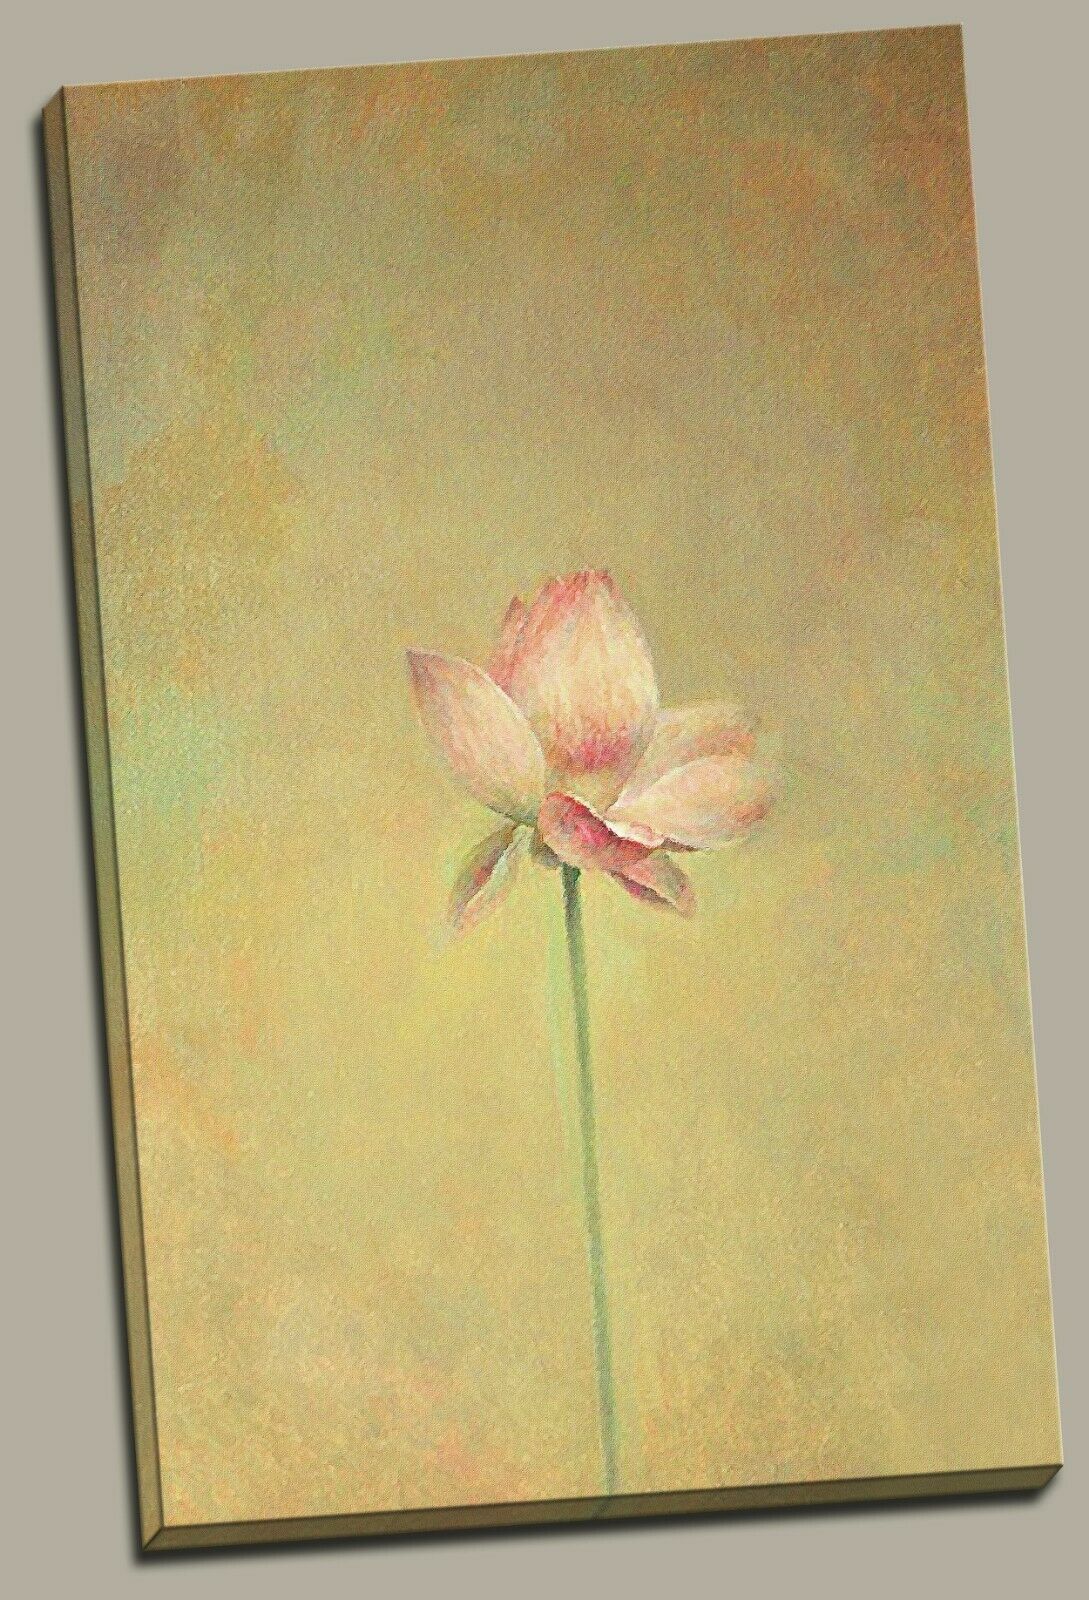 Neo Chinese Lotus painting Framed Canvas Prints Modern Wall Art Home Decor Print